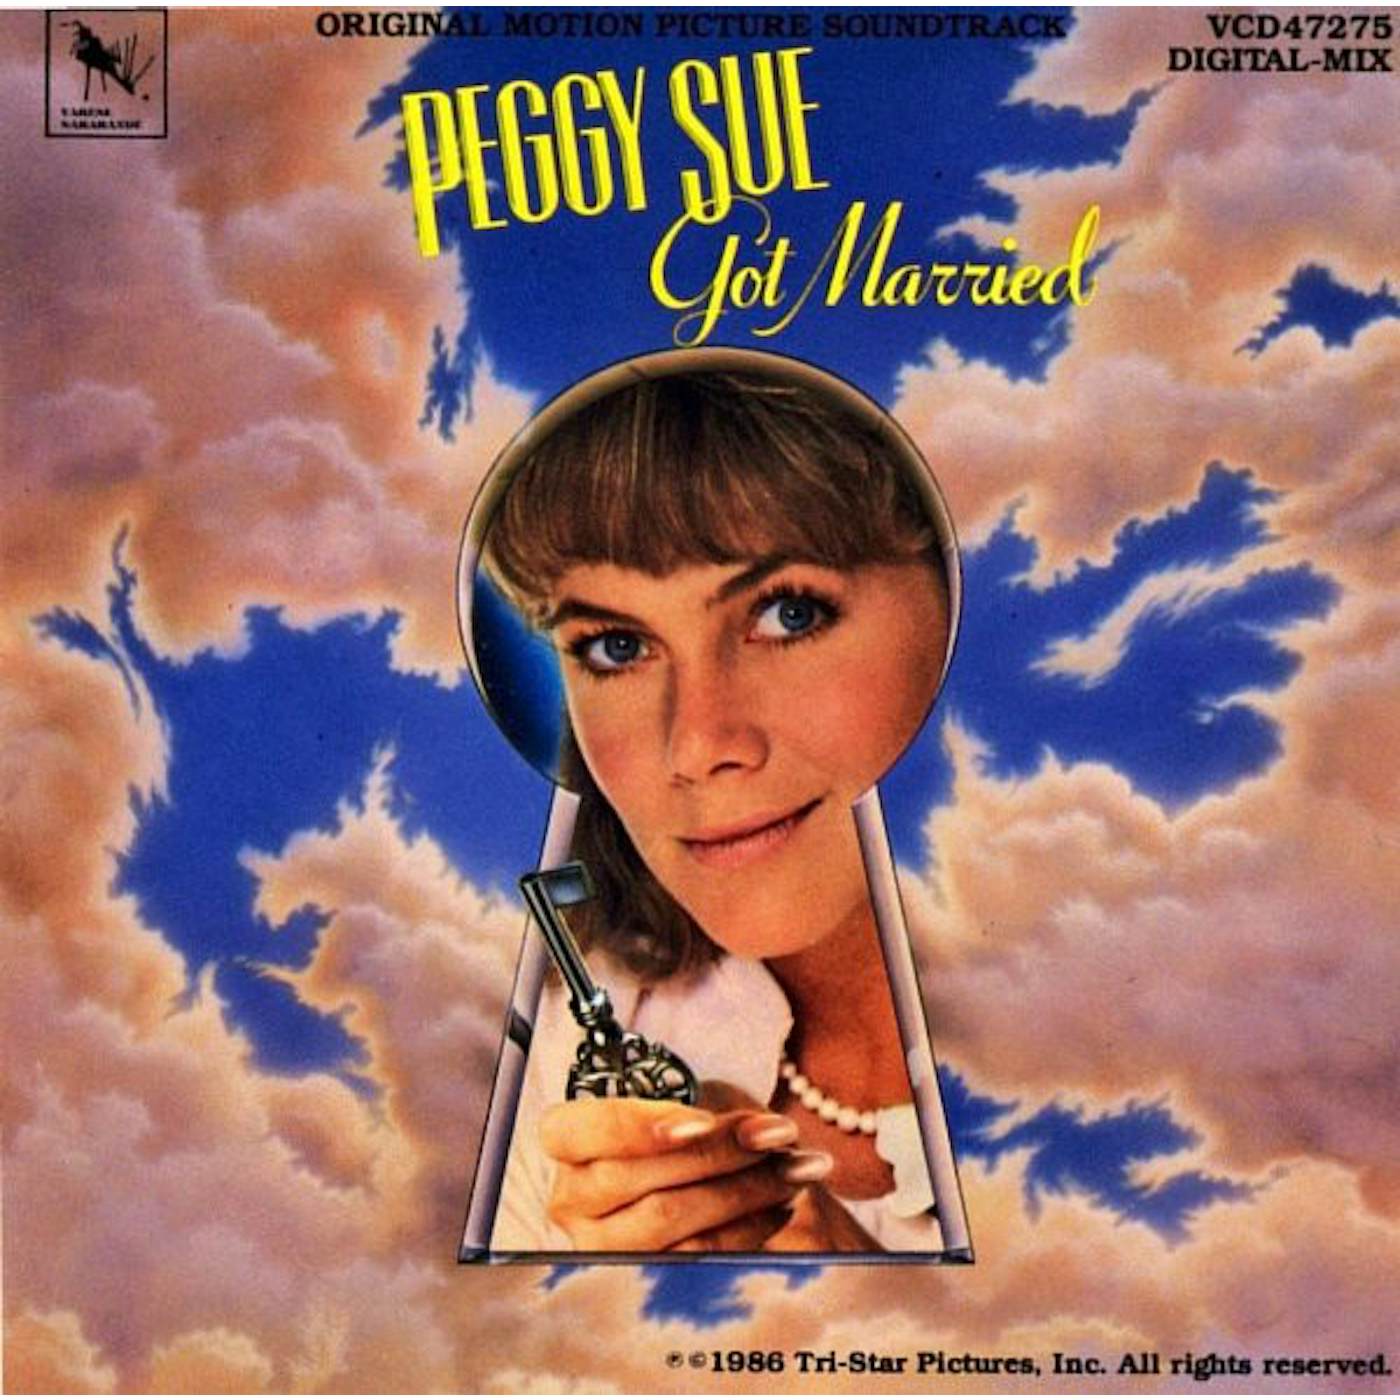 PEGGY SUE GOT MARRIED / O.S.T. (GER) Vinyl Record